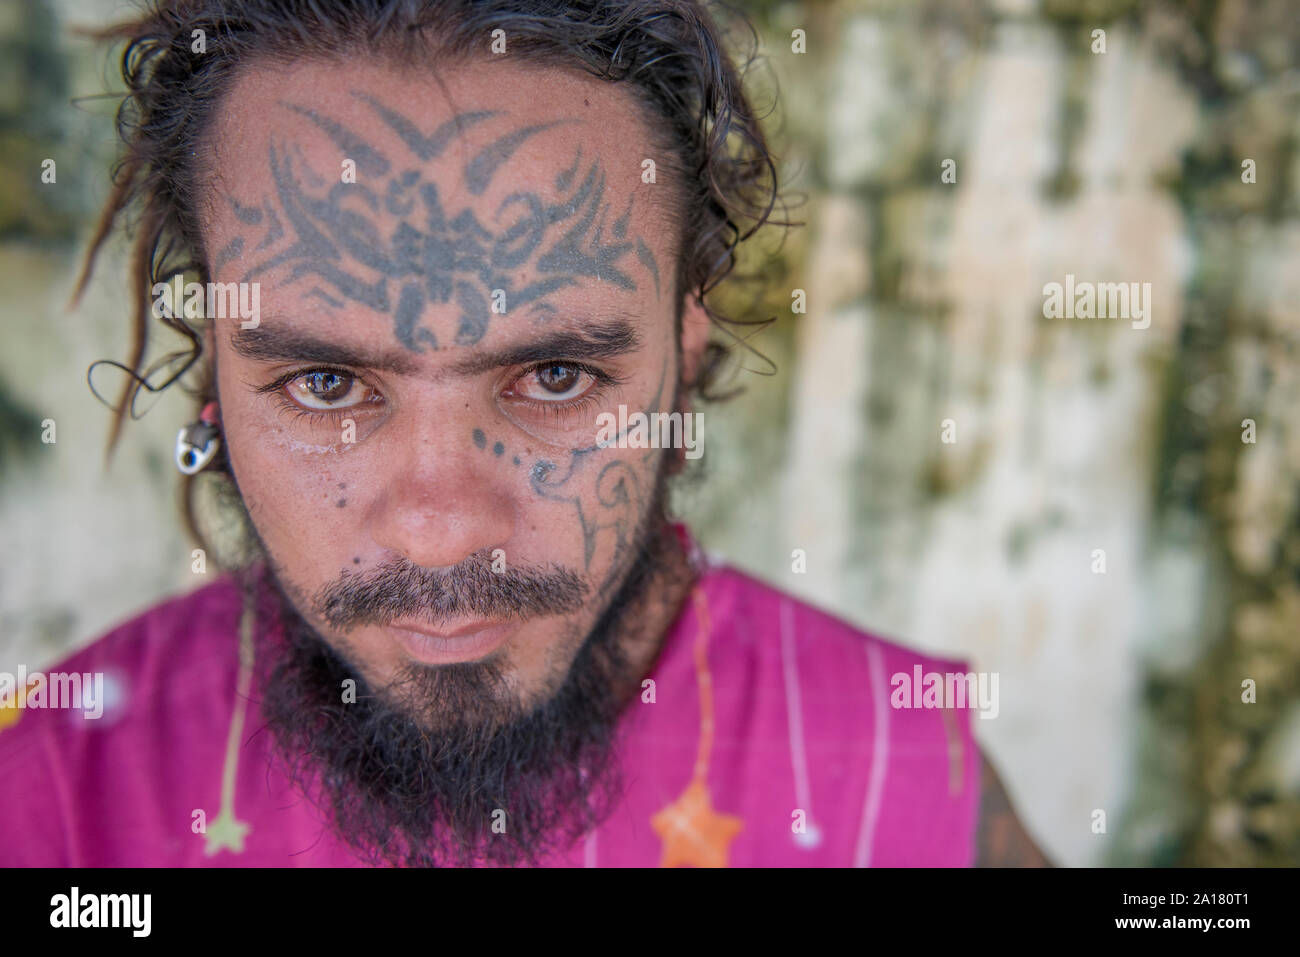 Man tattooed in the face Stock Photo